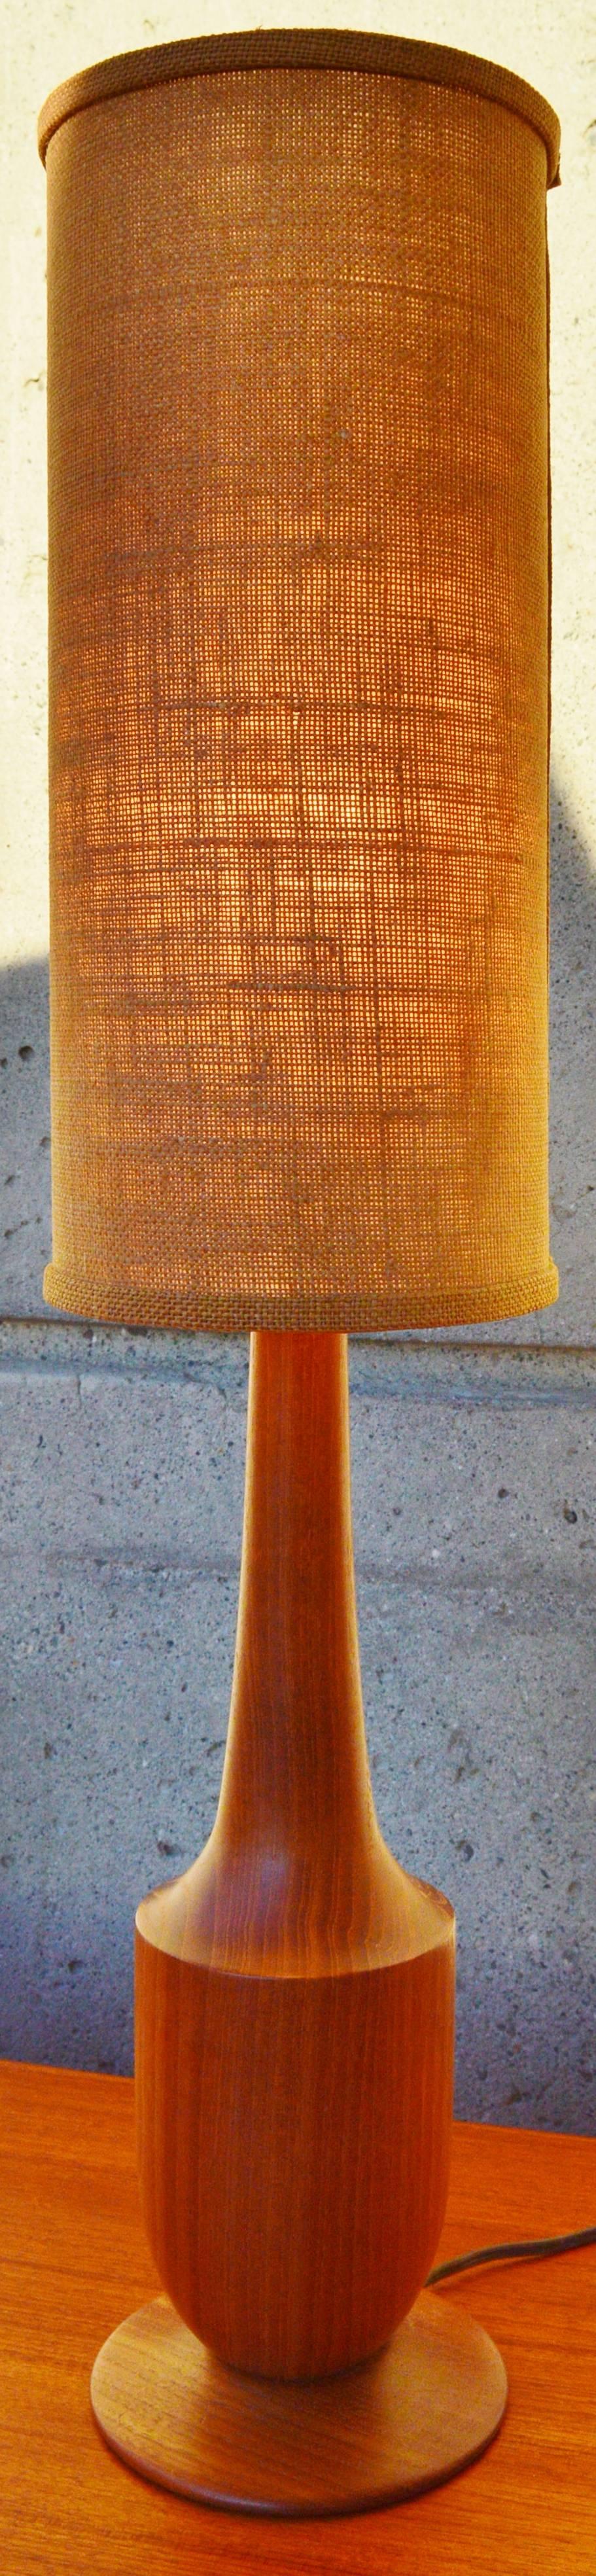 This Danish modern solid teak table lamp has gorgeous grain patterns throughout the sculptural form and disk base. Complemented beautifully by the original tall and thin jute cylindrical lamp shade. In excellent condition and with a nice rich